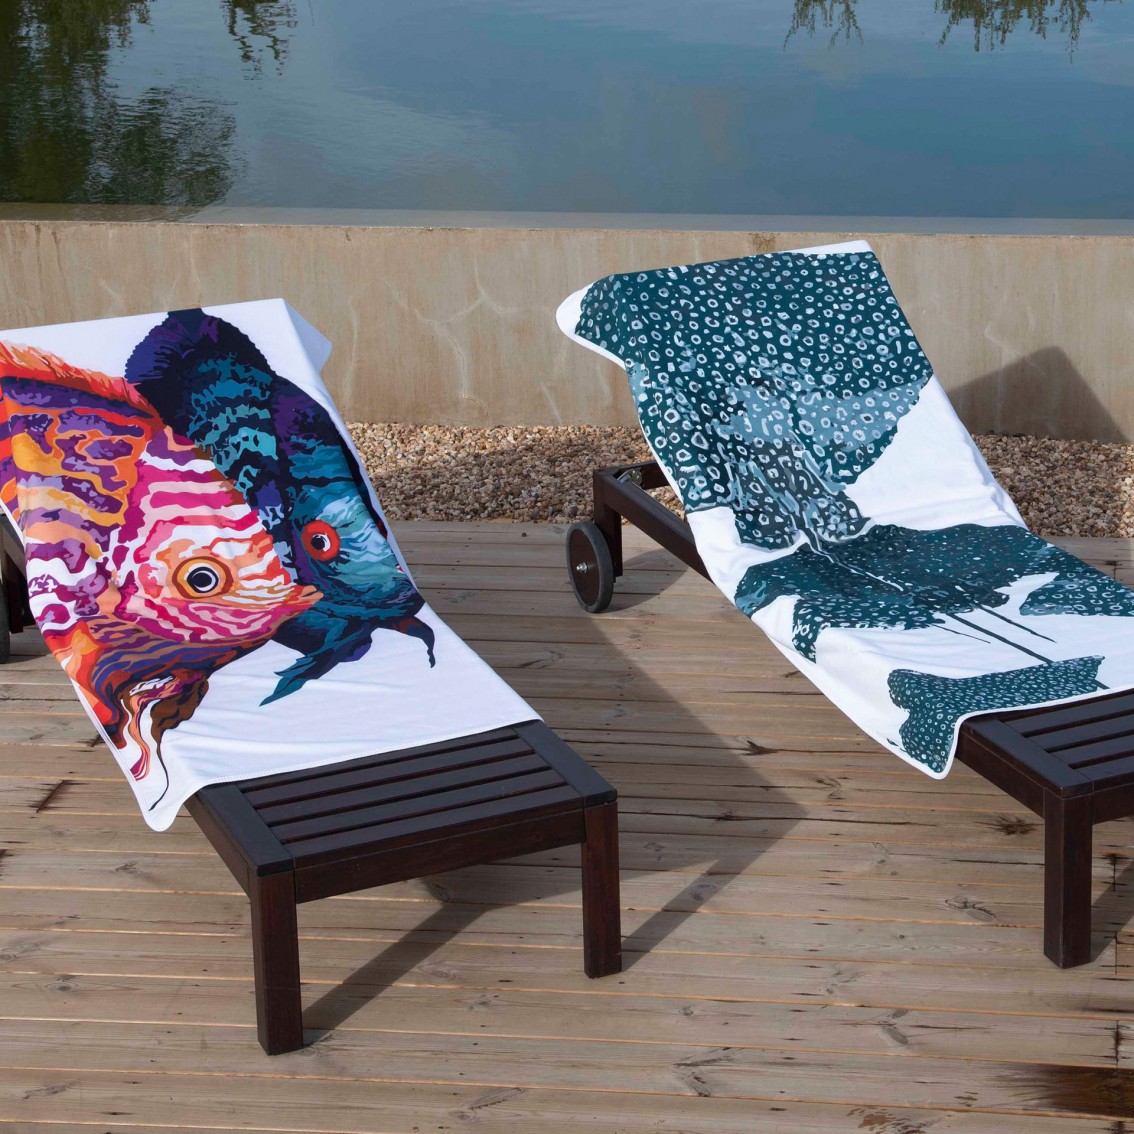 STING RAY BEACH TOWELS